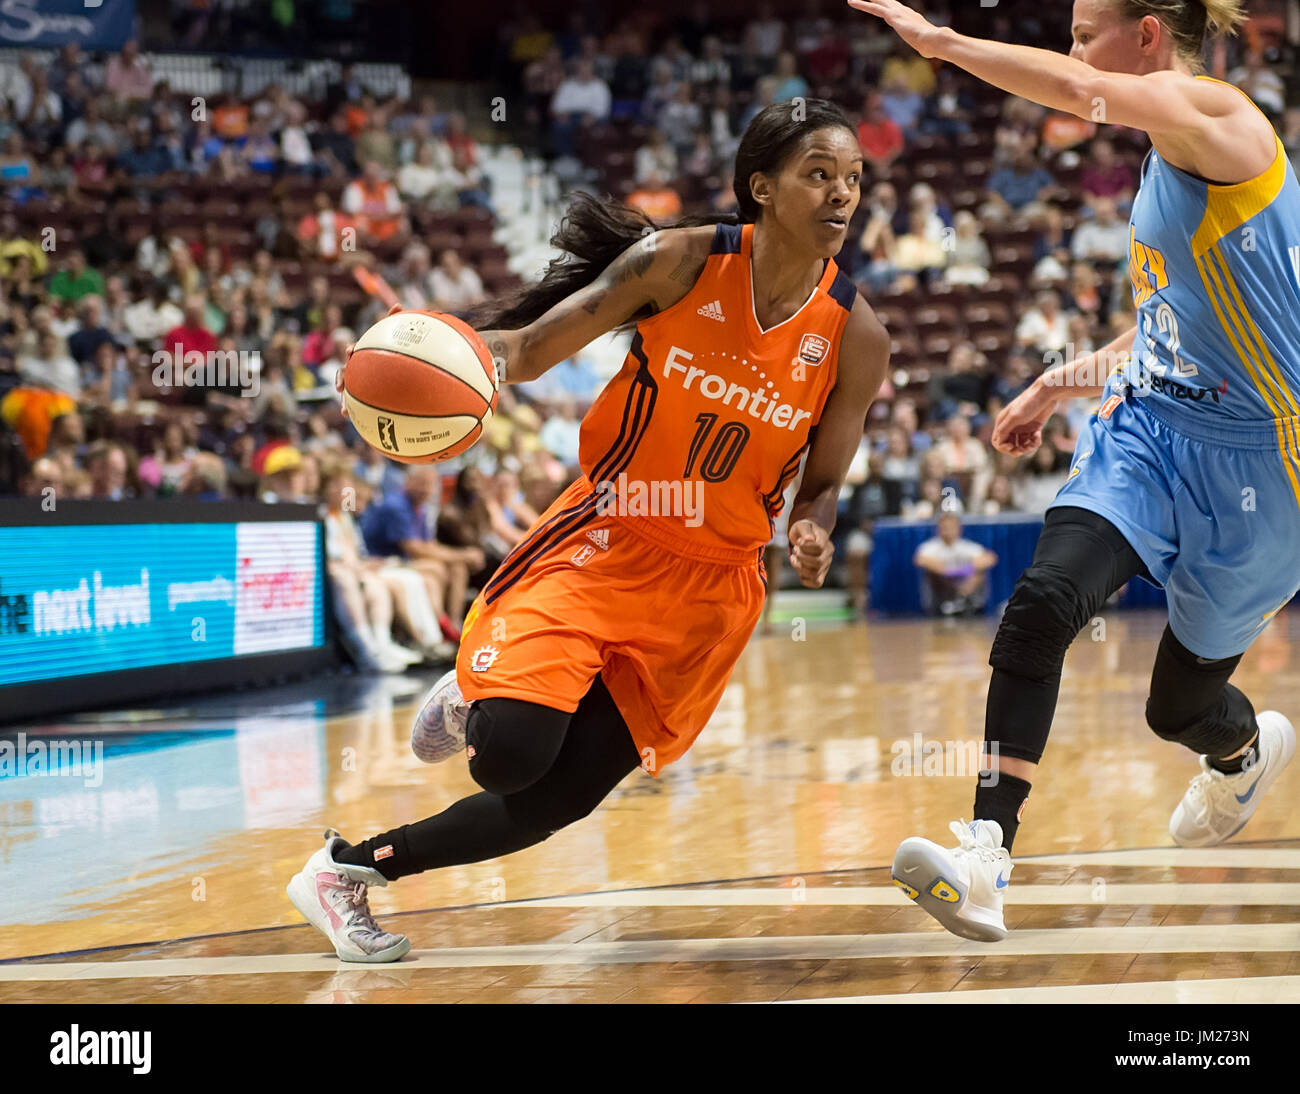 Uncasville, Connecticut, USA. 25 July, 2017. Connecticut Sun guard Courtney Williams (10) drives to the basket during the second half of the WNBA basketball game between the Chicago Sky and the Connecticut Sun at Mohegan Sun Arena. Connecticut defeated Chicago 93-72. Chris Poss/Alamy Live News Stock Photo